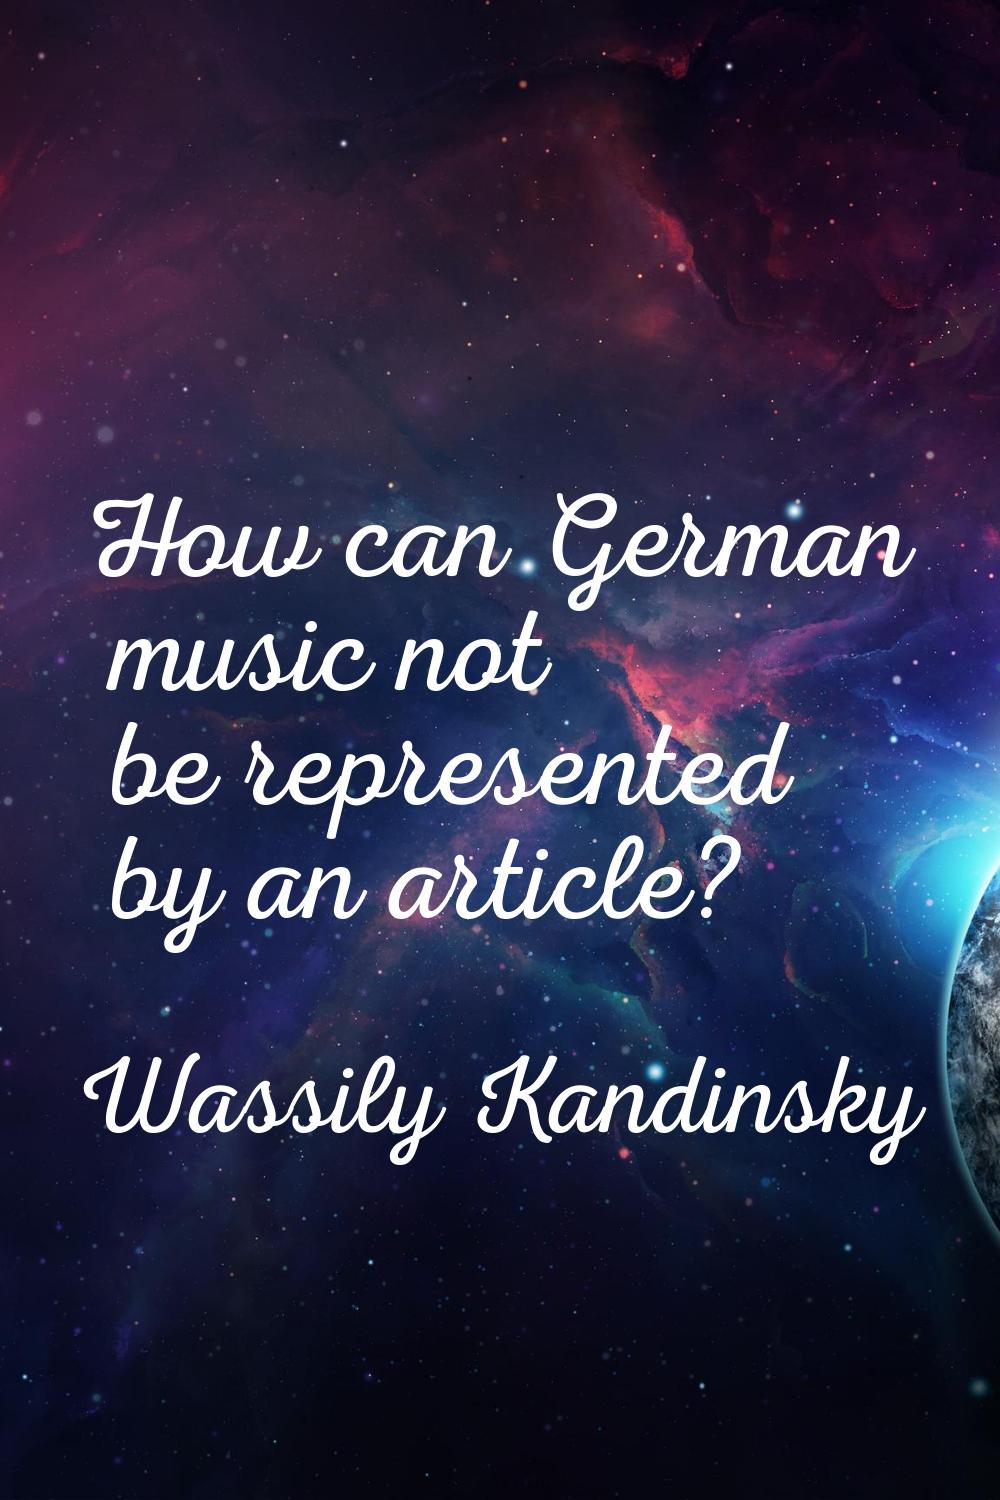 How can German music not be represented by an article?